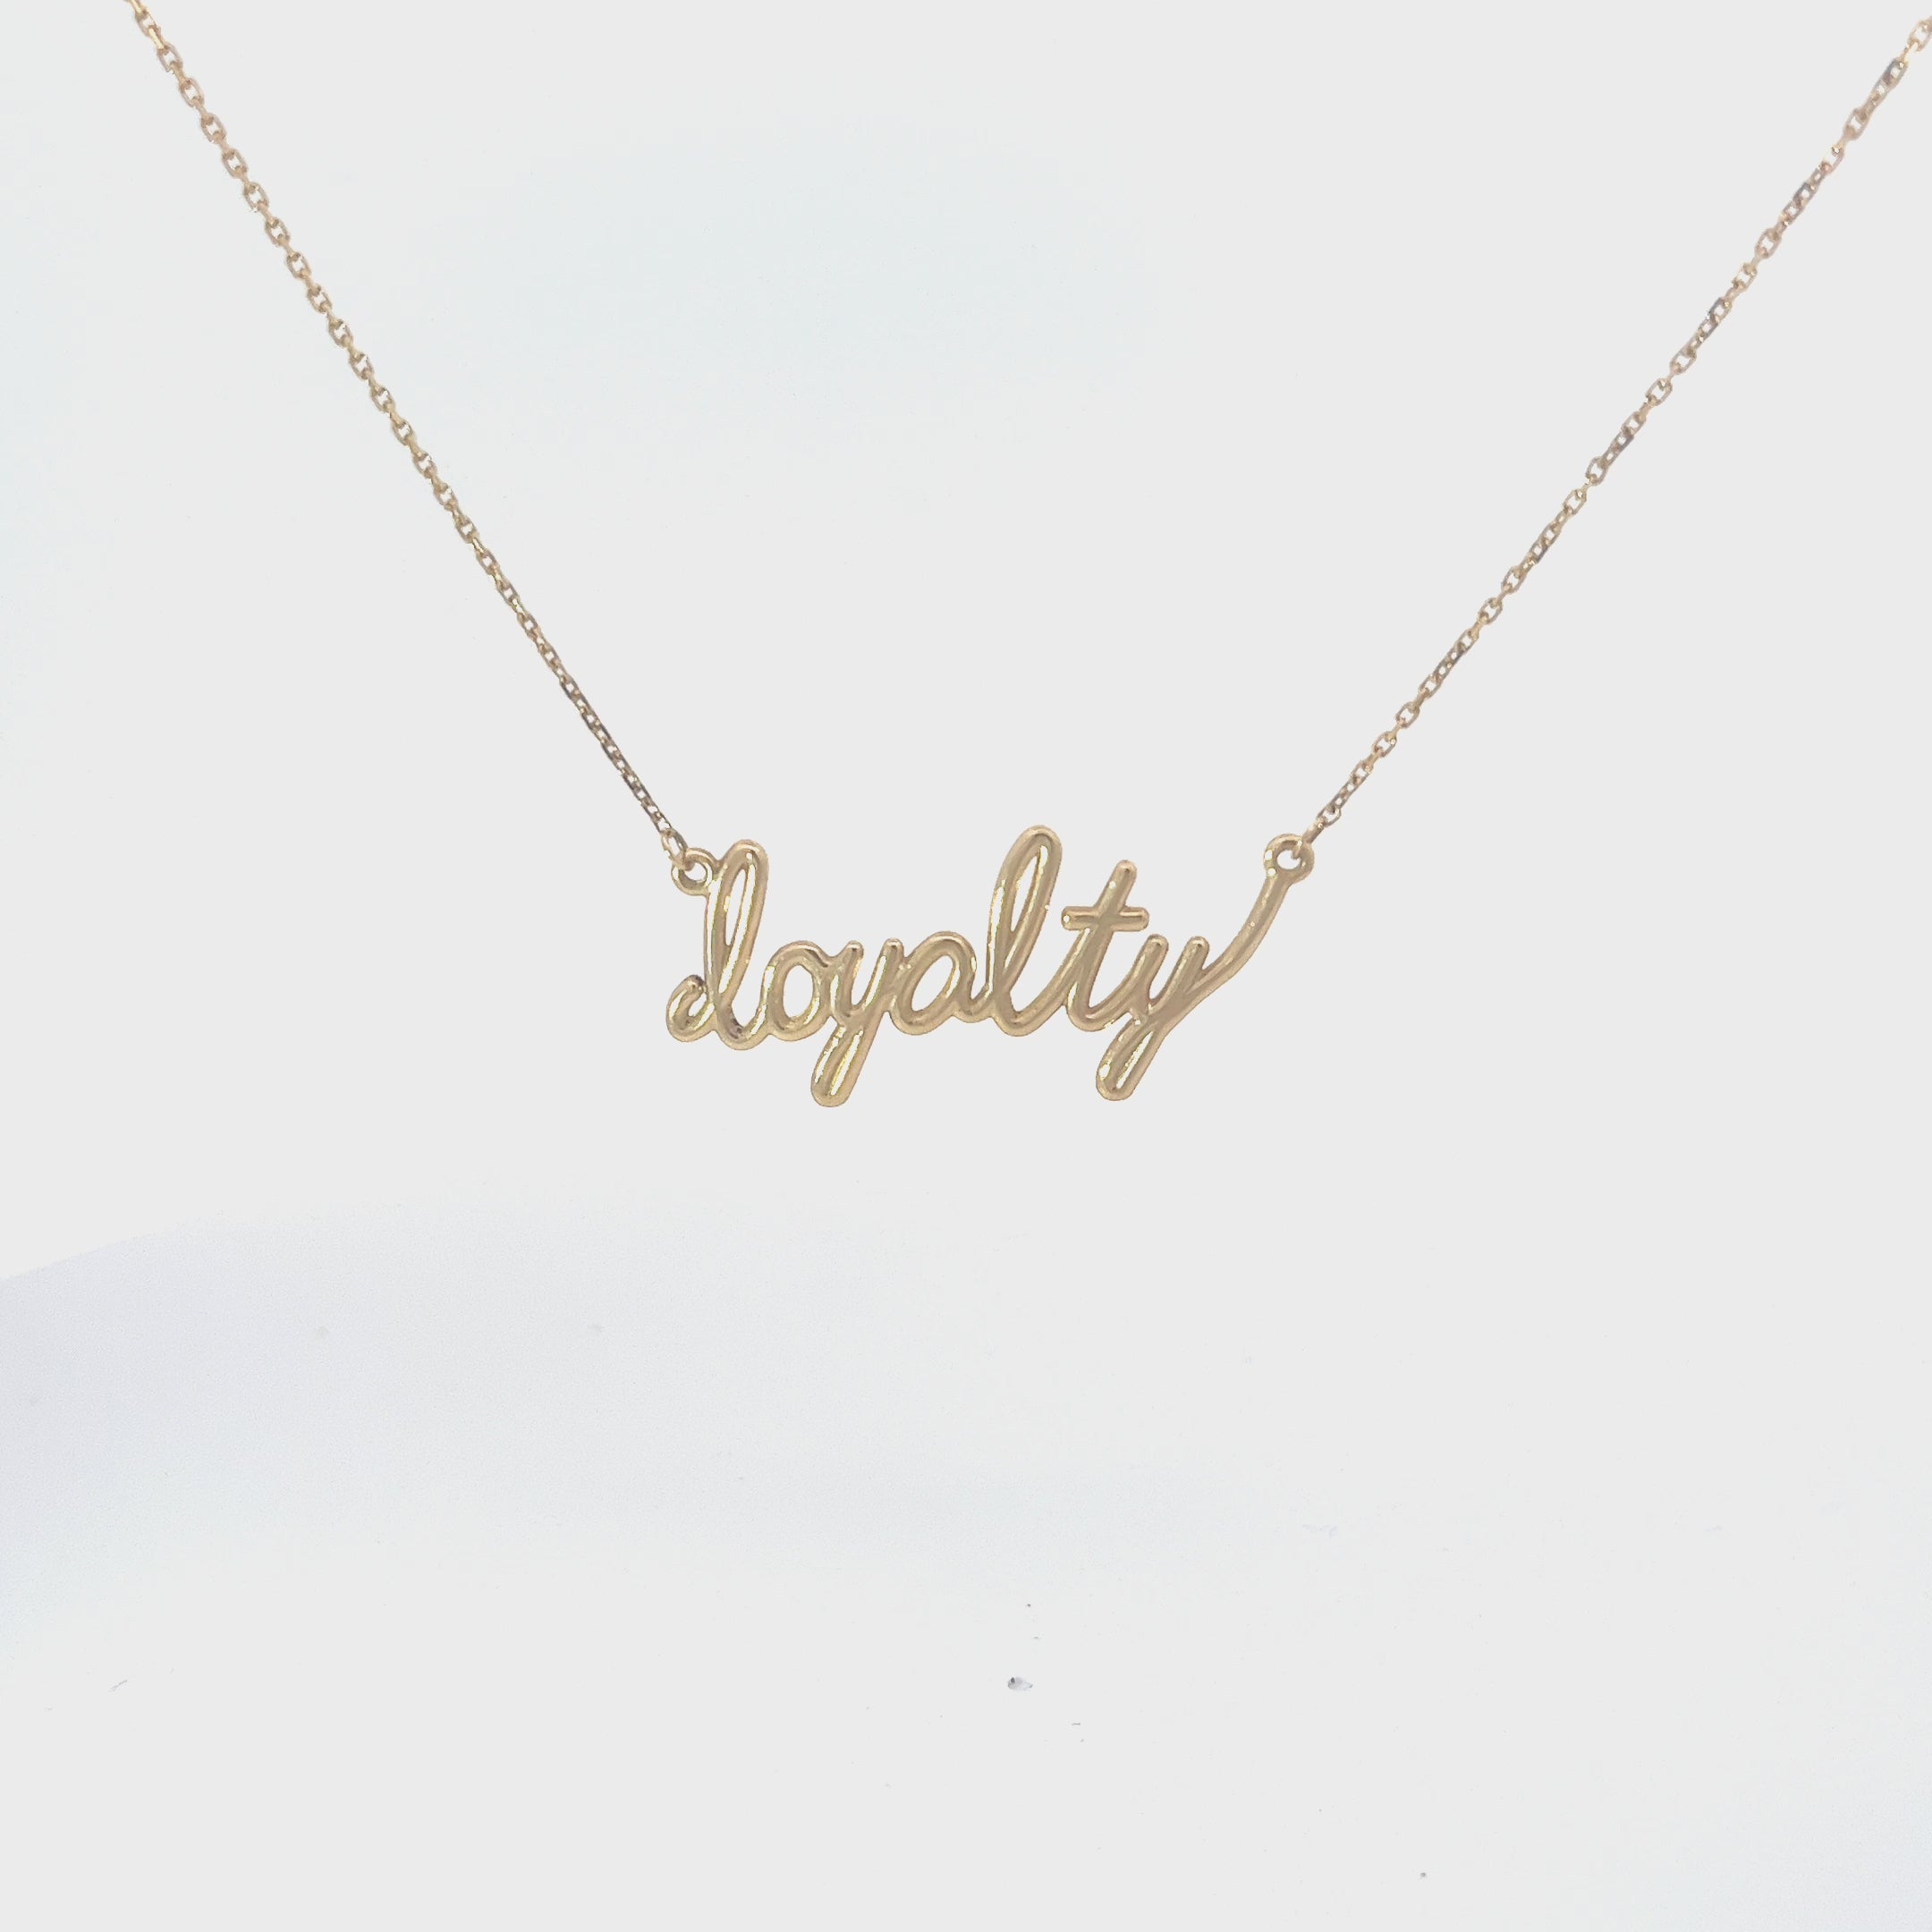 Ladies 14k yellow gold Loyalty Necklace